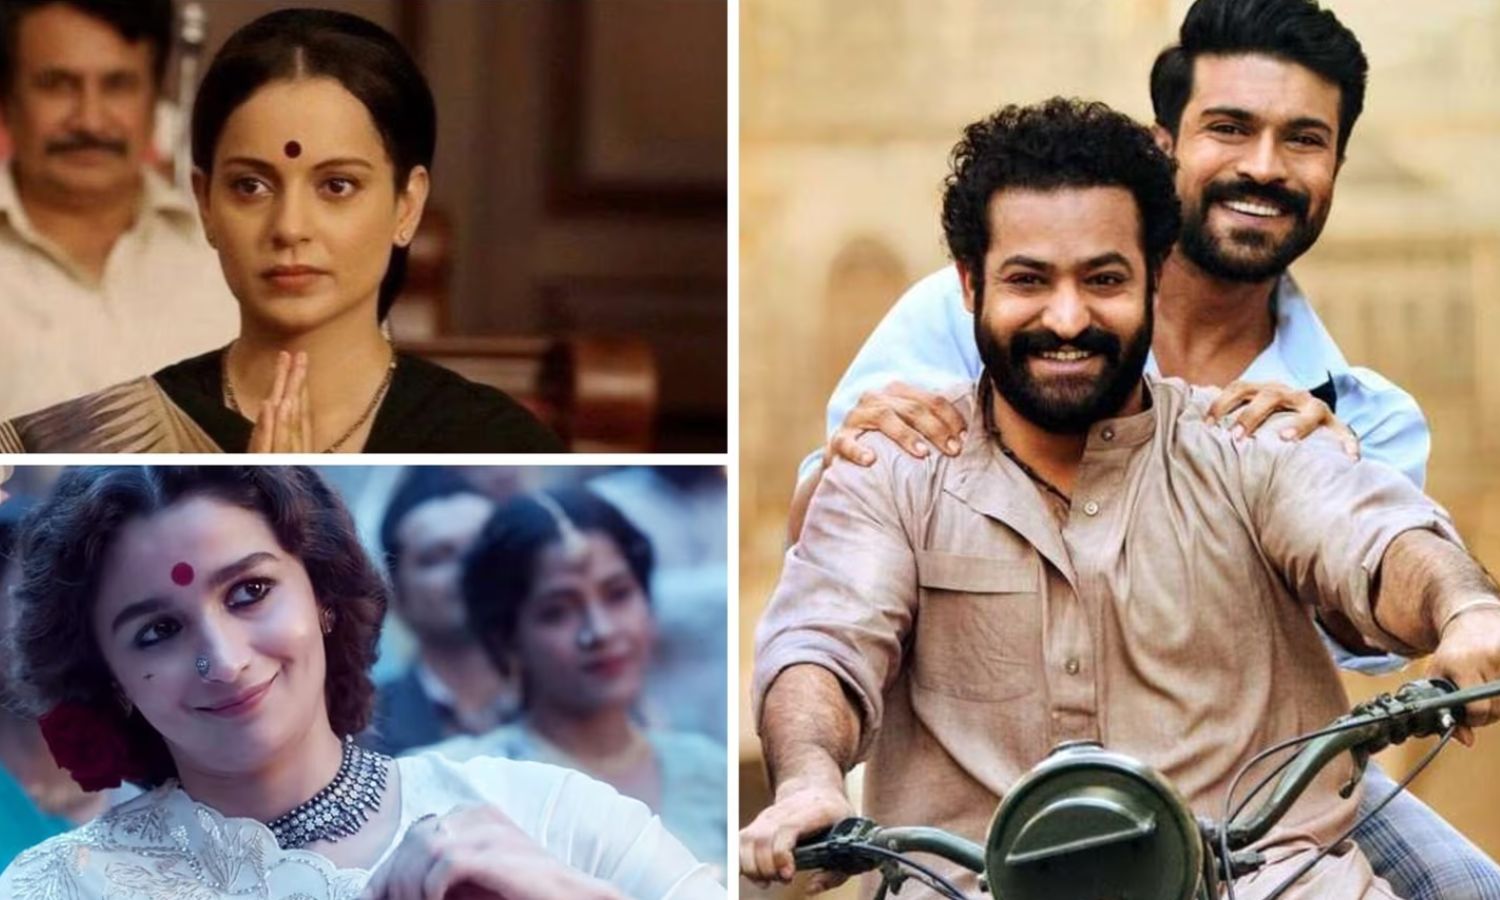 69th National Film Awards Predictions, Nominees, and Ceremony Insights